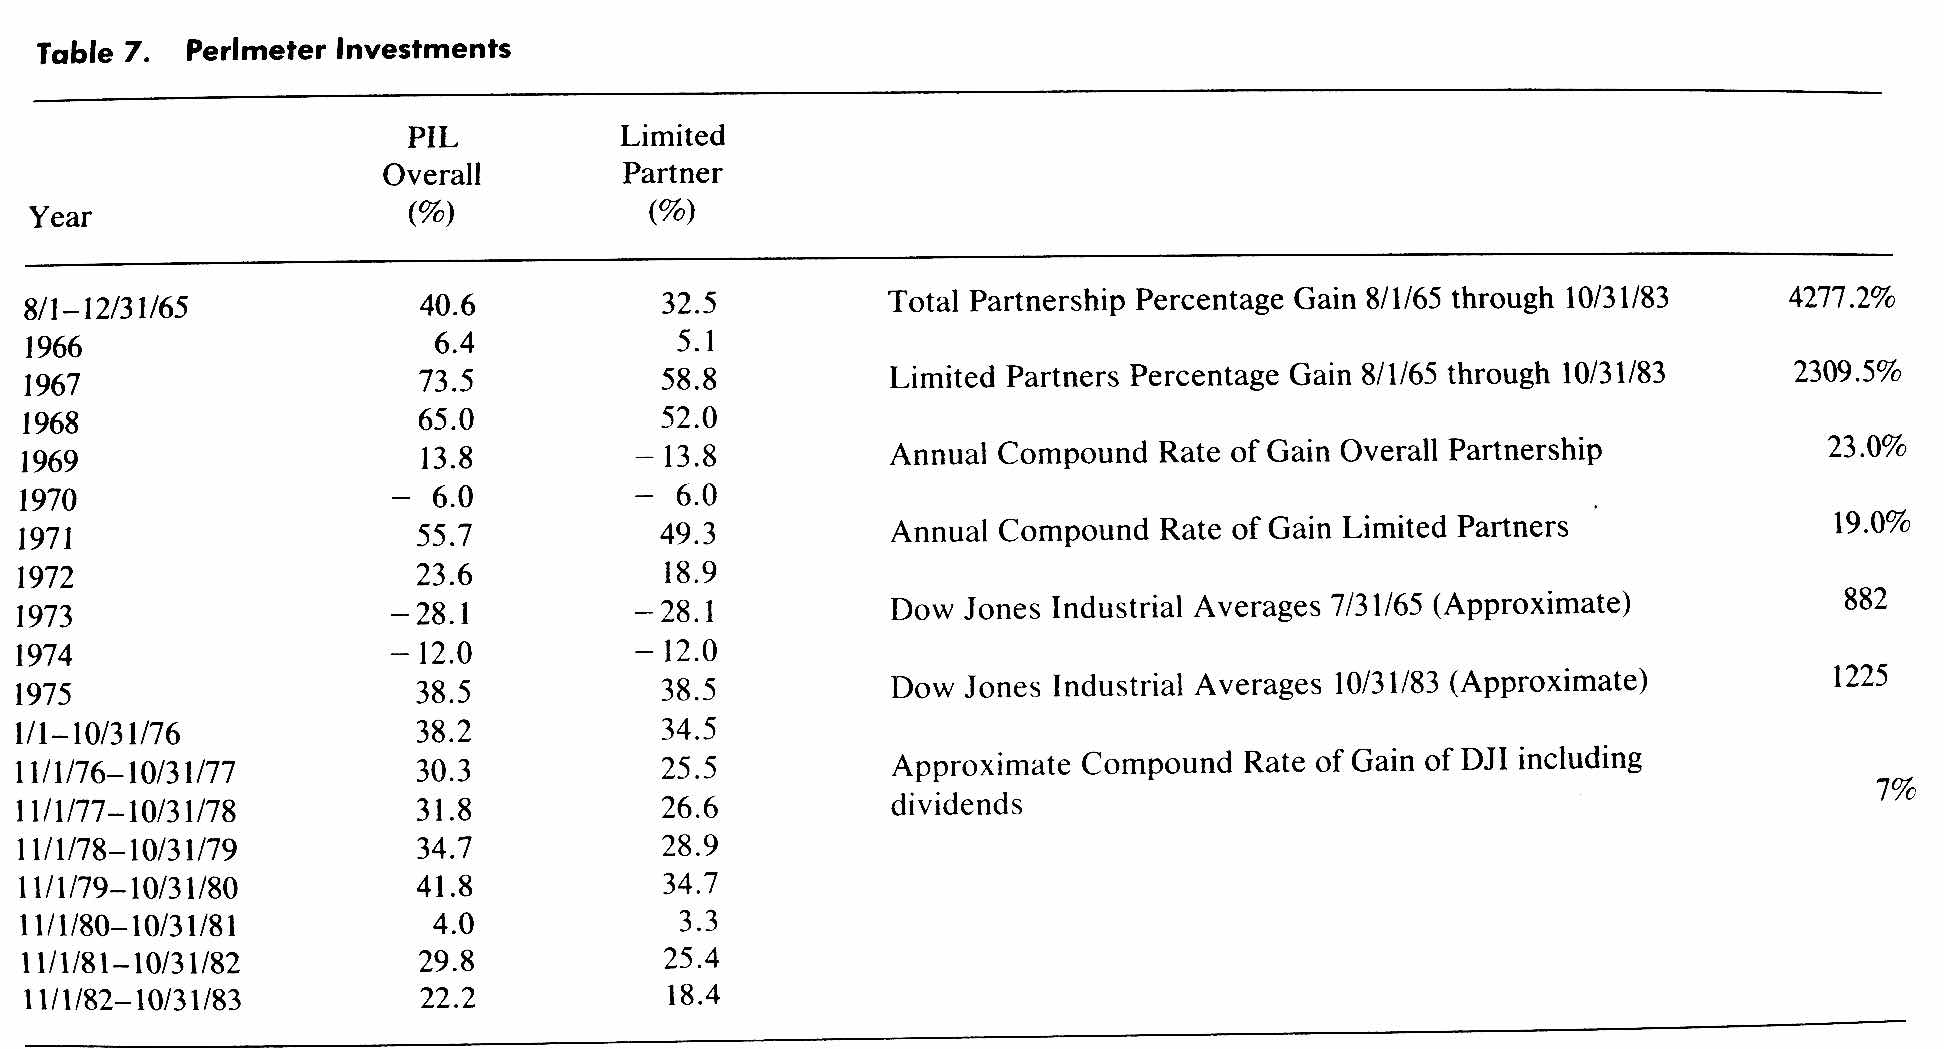 Table 7 Perlmeter Investments from The Intelligent Investor by Benjamin Graham